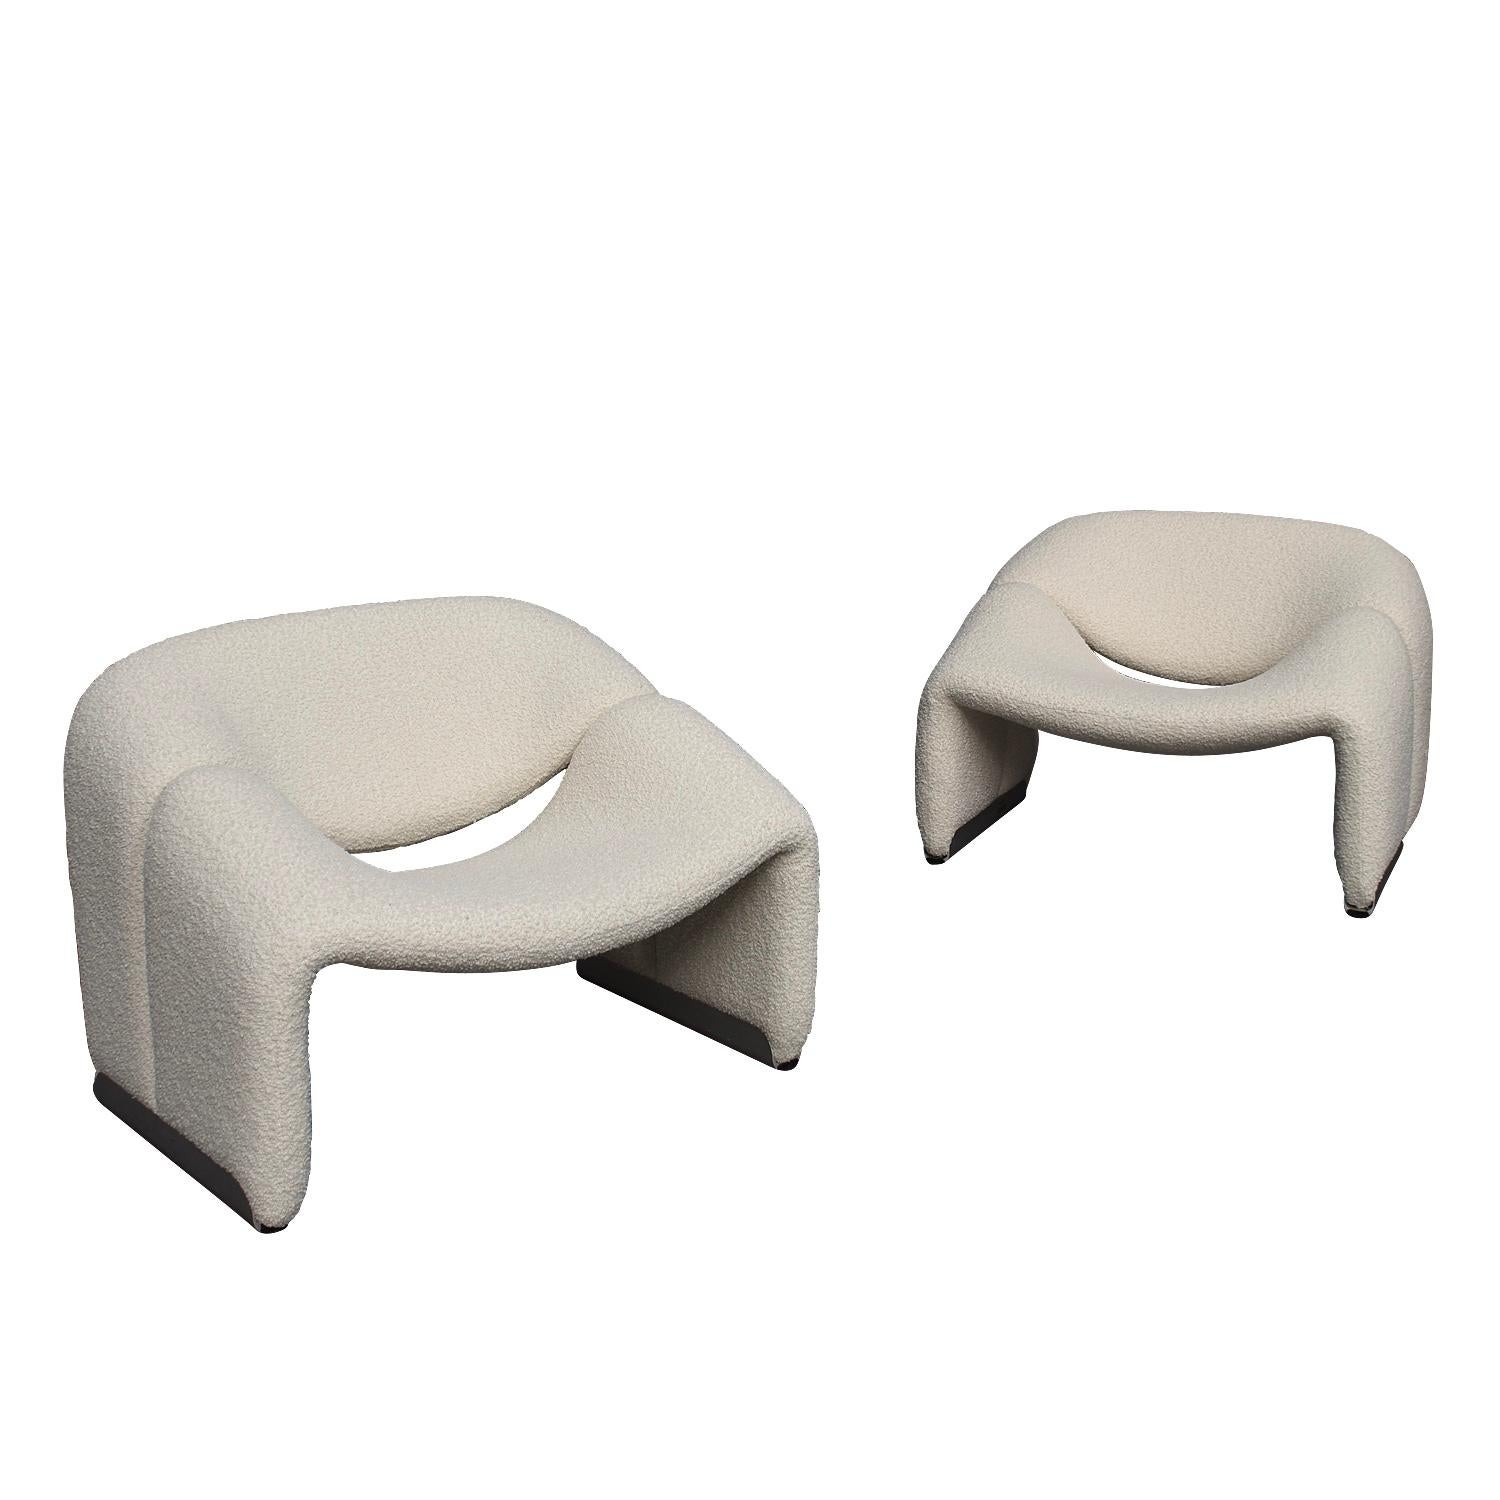 Pair of ‘Groovy’ F598 lounge chairs by Pierre Paulin for Artifort, Netherlands, 1972.

The chair has been reupholstered in a beautiful off-white bouclé wool fabric by Bisson Bruneel (France). Aluminum feet.
Price is for one chair.

Designer: Pierre